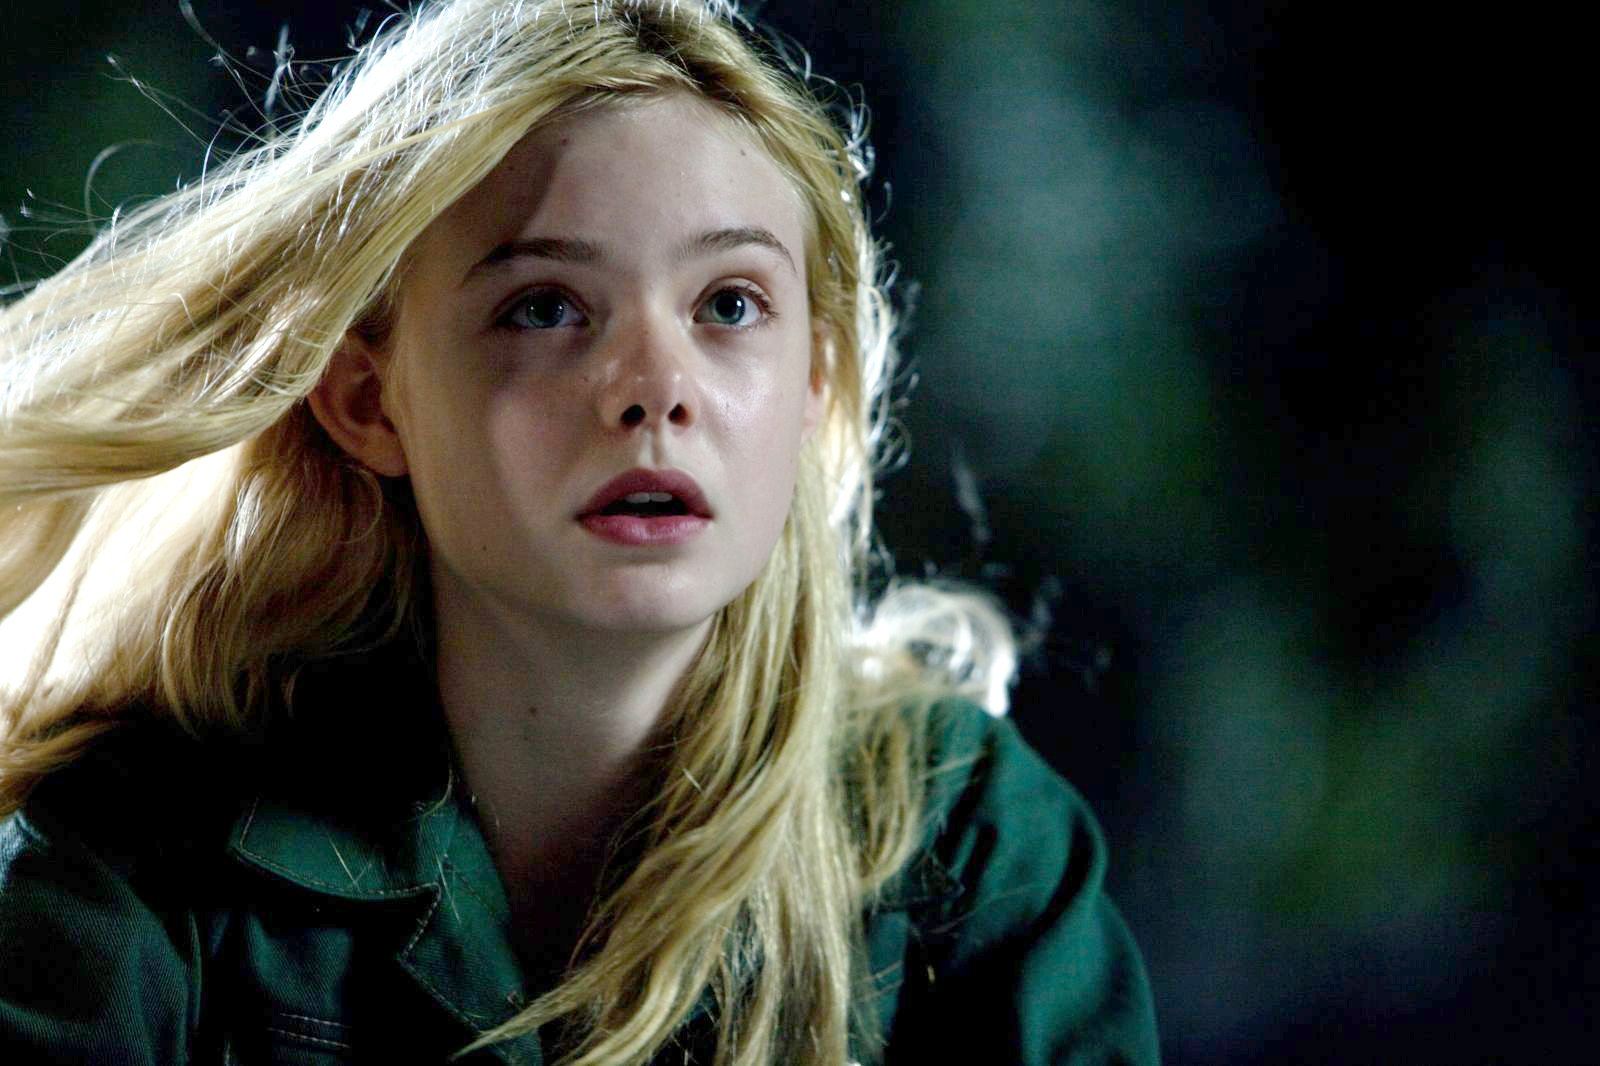 Elle Fanning stars as Alice Dainard in Paramount Pictures' Super 8 (2011). Photo credit by Francois Duhamel.